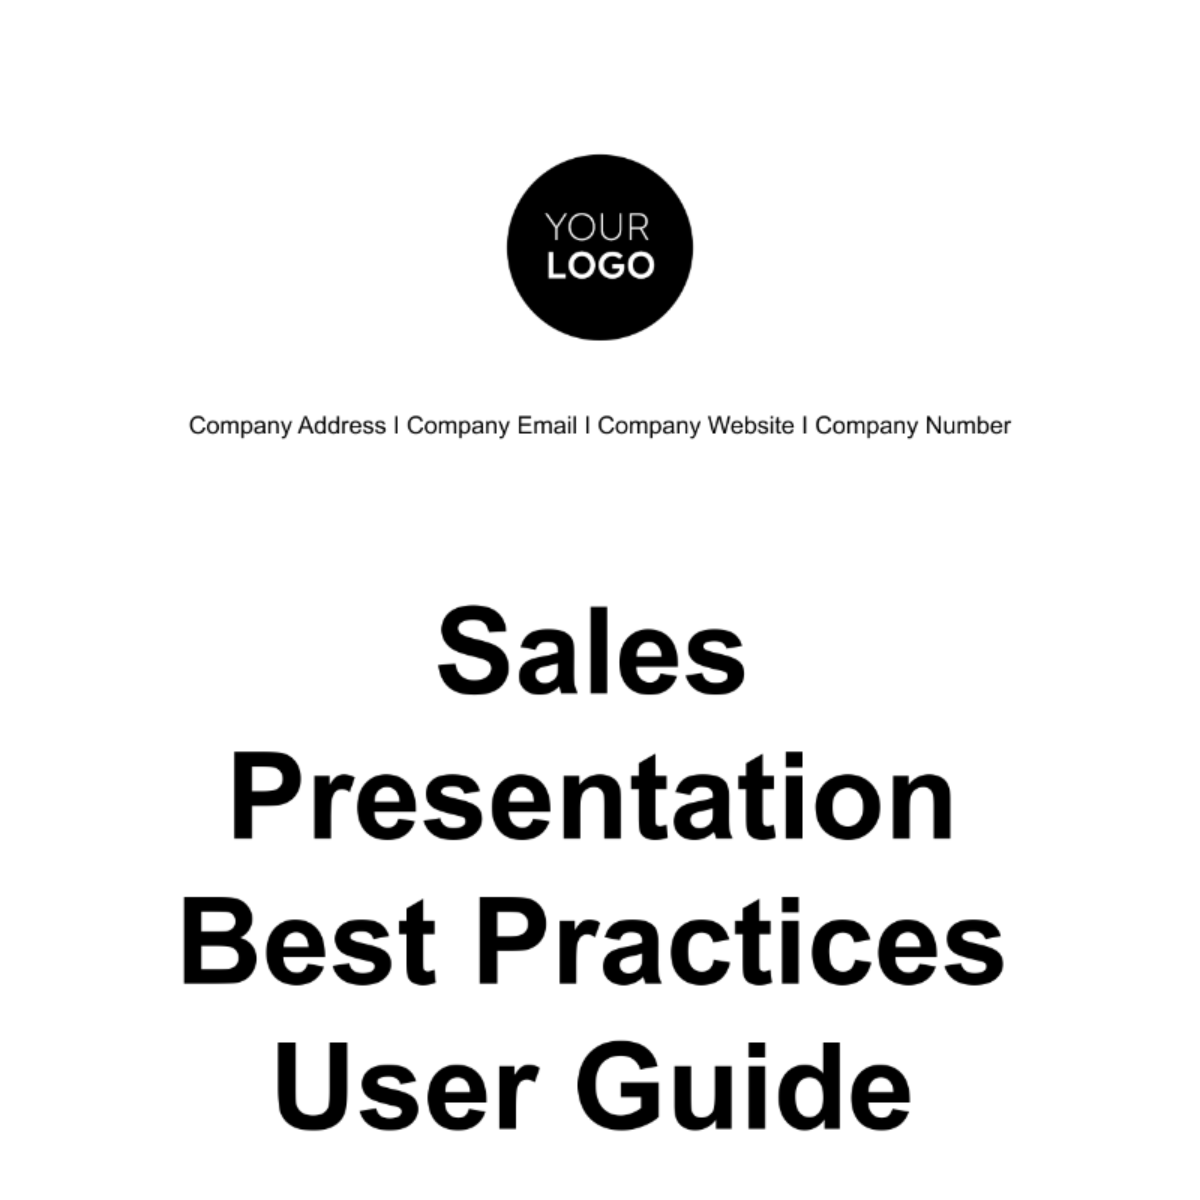 Free Sales Presentation Best Practices User Guide Template